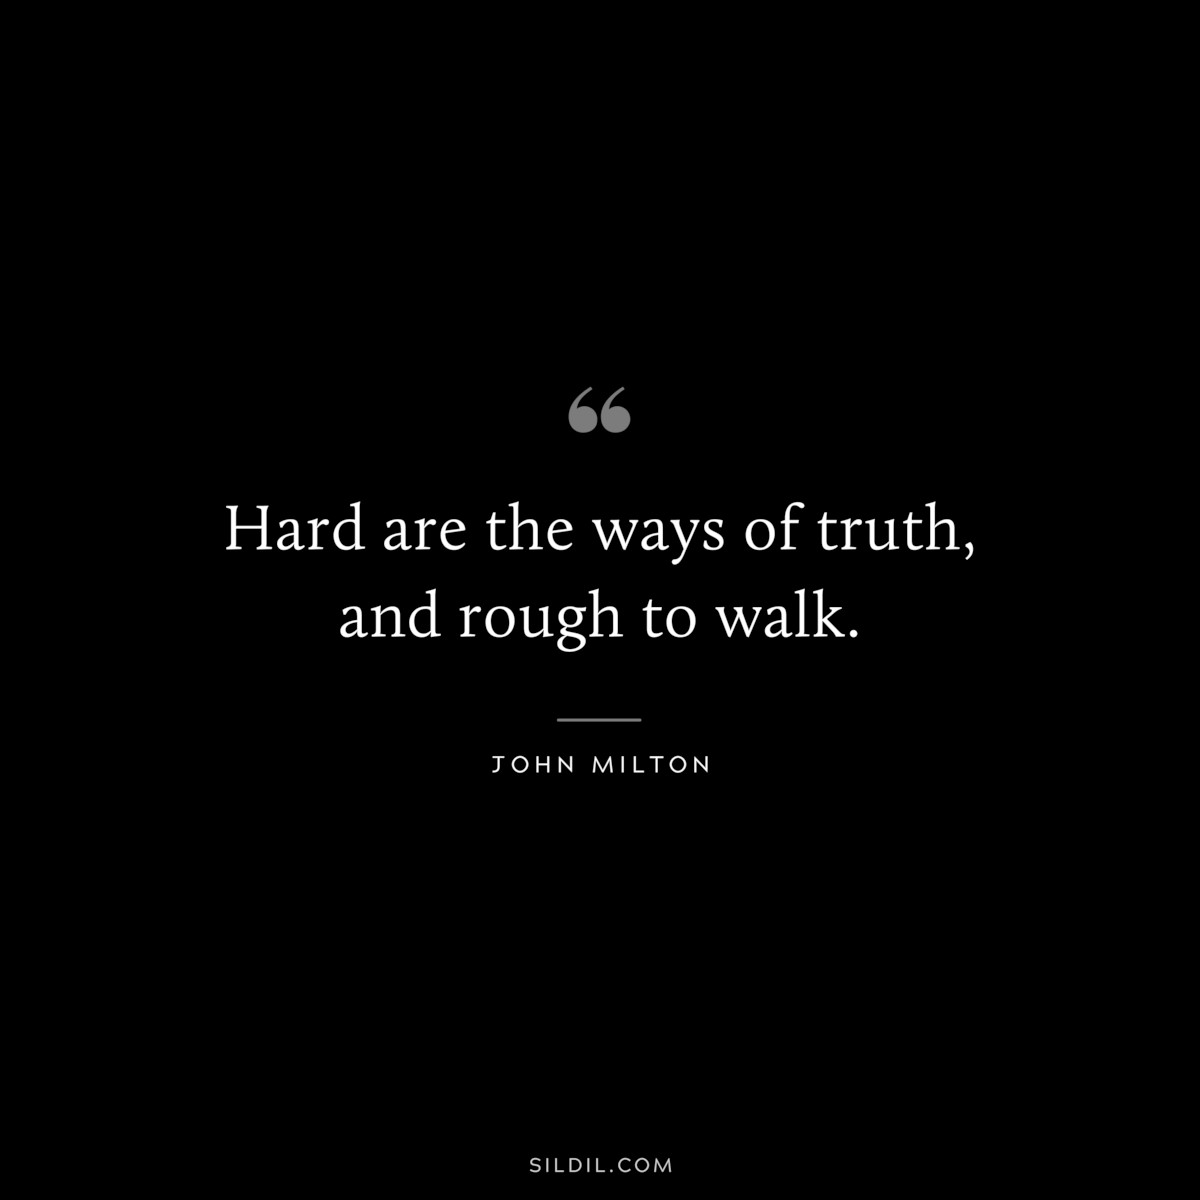 Hard are the ways of truth, and rough to walk. ― John Milton